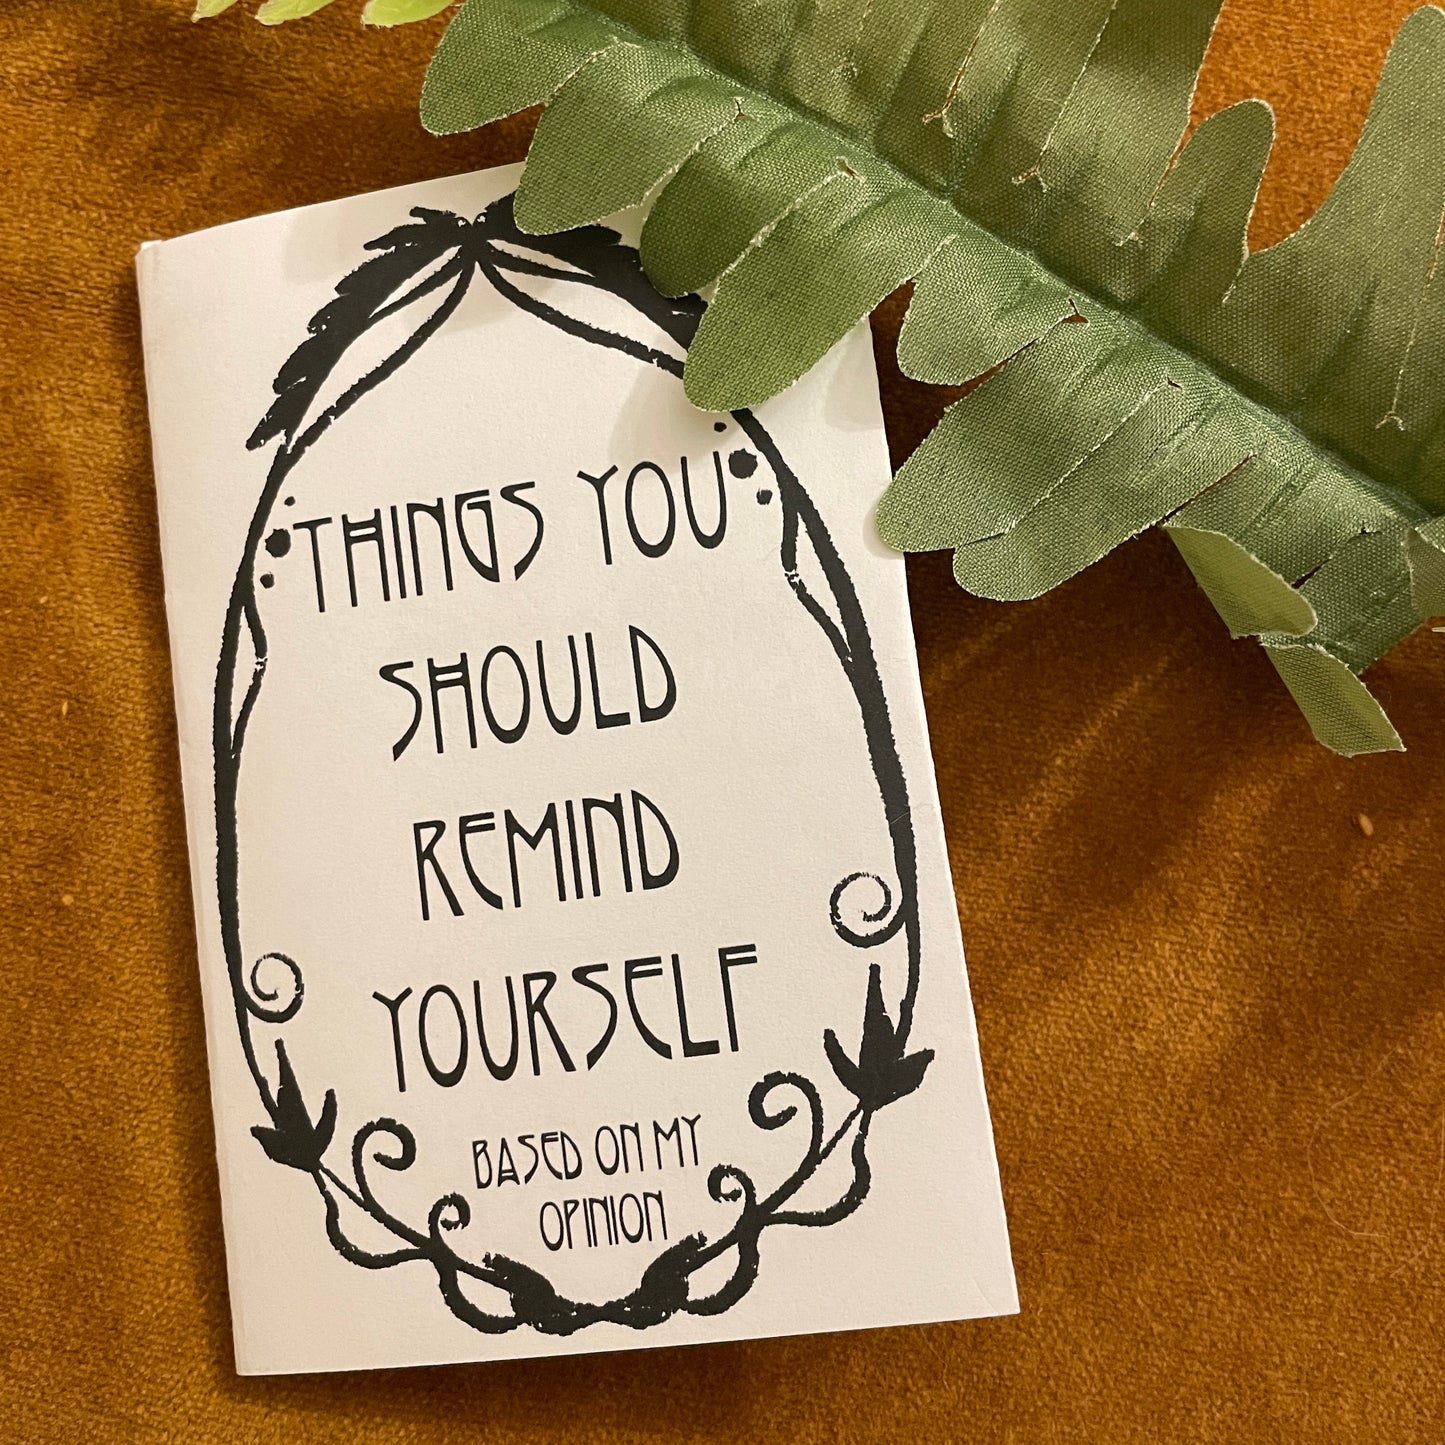 "Things You Should Remind Yourself, Based On My Opinion" Zine